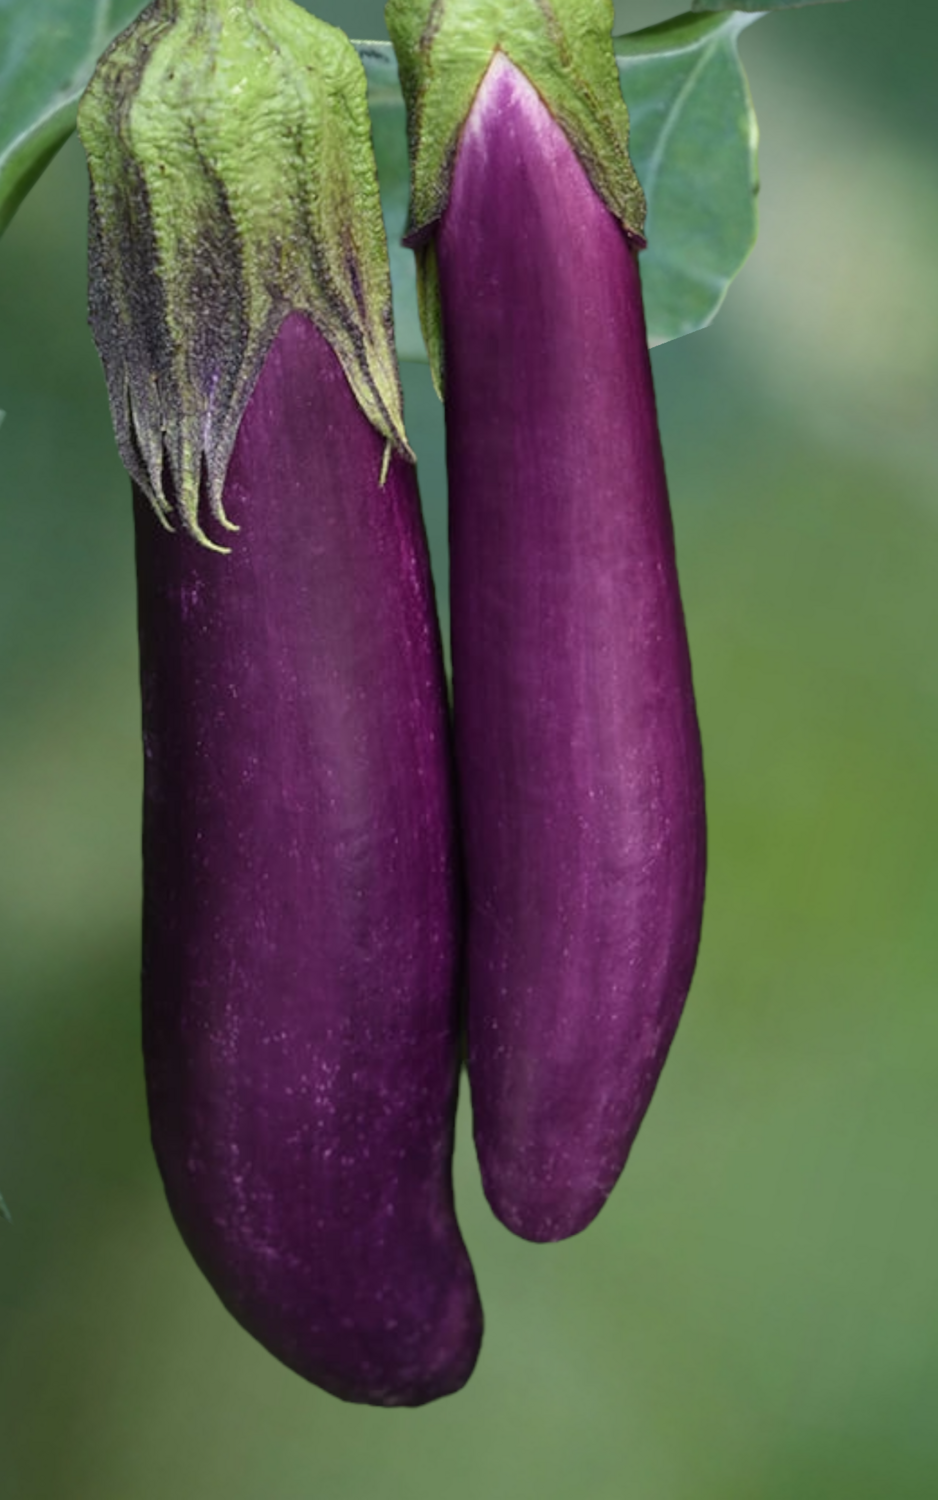 Asian Delight Eggplant Seeds